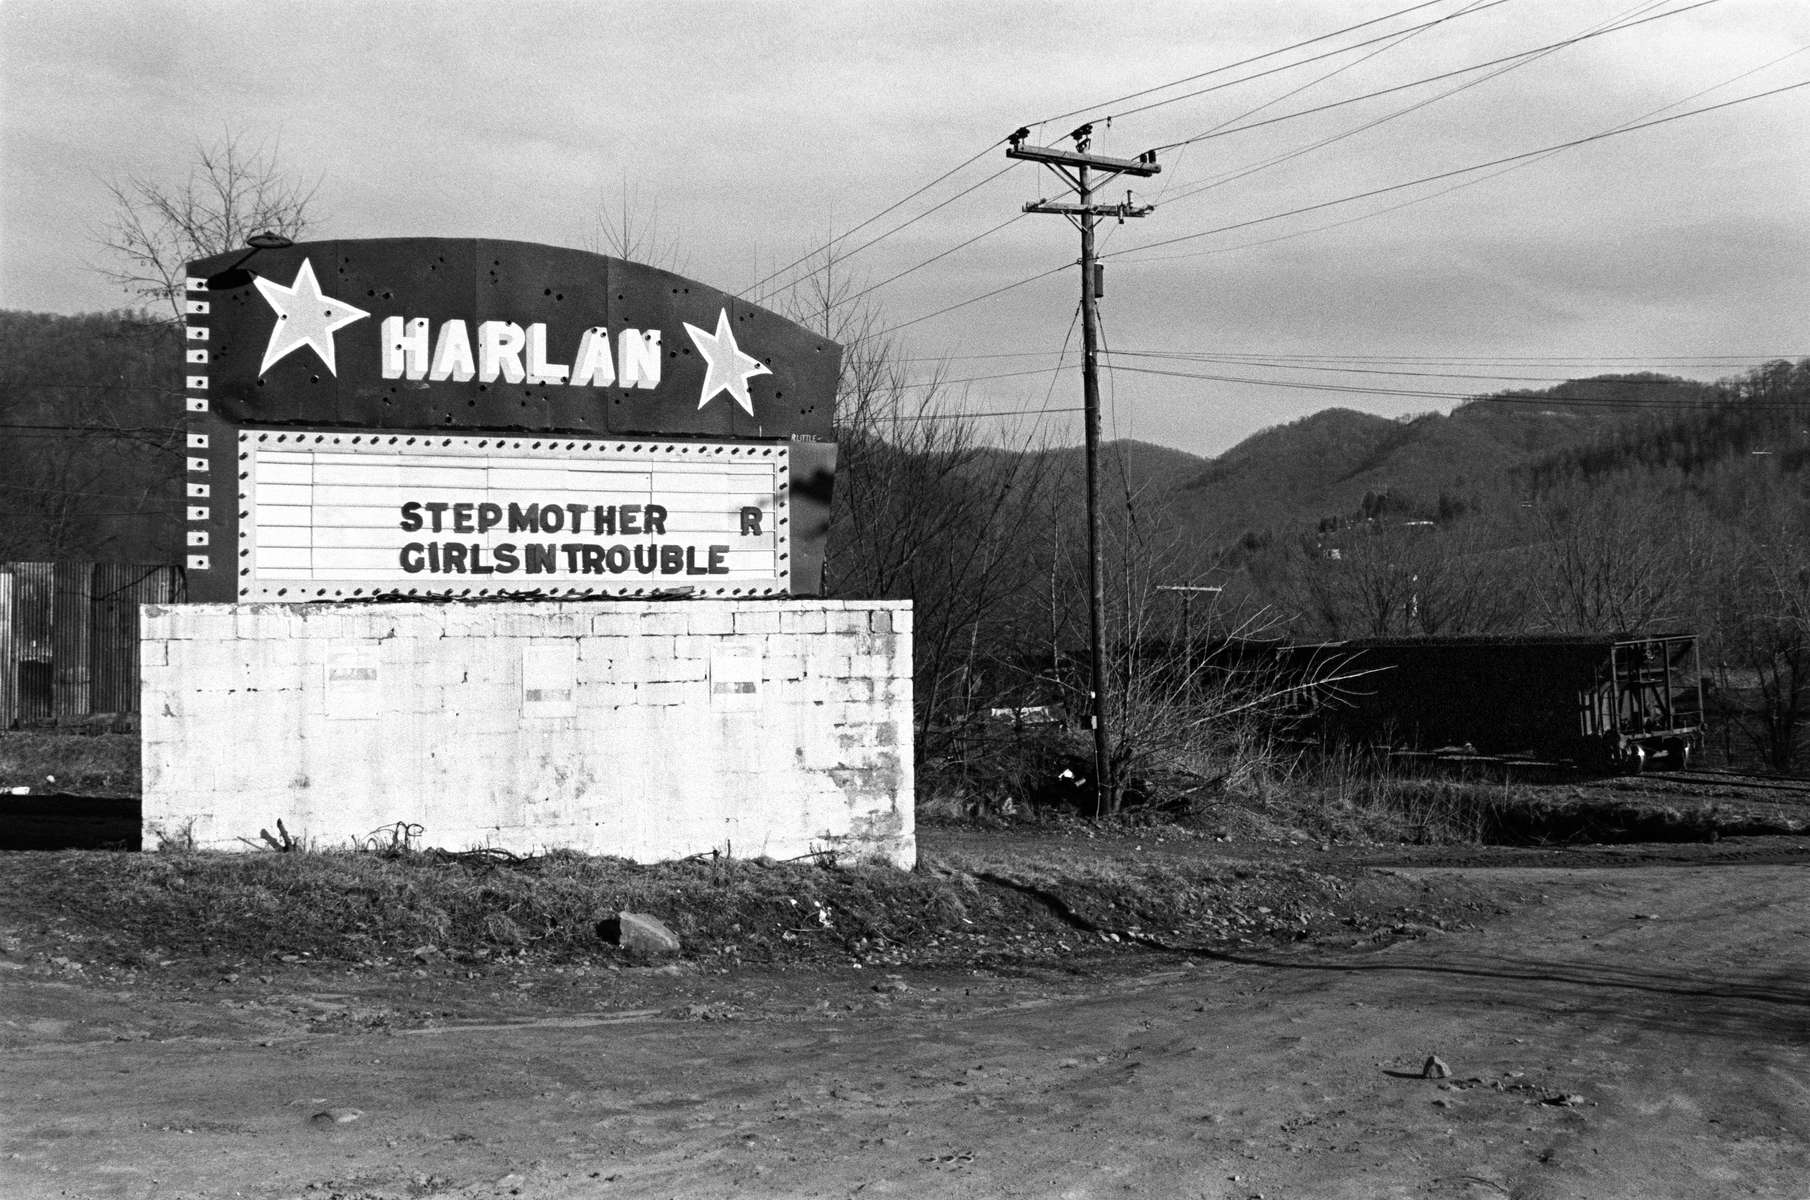 This marquee for a drive-in movie with a parked coal train on the right marks a desolate landscape after the theater closed and was demolished. Harlan has come to symbolize the hard-scrabble history of coal mining in Appalachia. Mining was dangerous work, with men occasionally trapped in collapsed mines resulting in multiple deaths. The Harlan Coal Wars lasted from 1931 to 1939, with numerous miners, deputies, and bosses killed. Strikes marked by violence continued for decades afterward. Underground mines began closing in the late 1970's, replaced by mountain-top removal and large-scale surface strip mining that scarred the landscape and polluted water sources. Jon Chase photo.